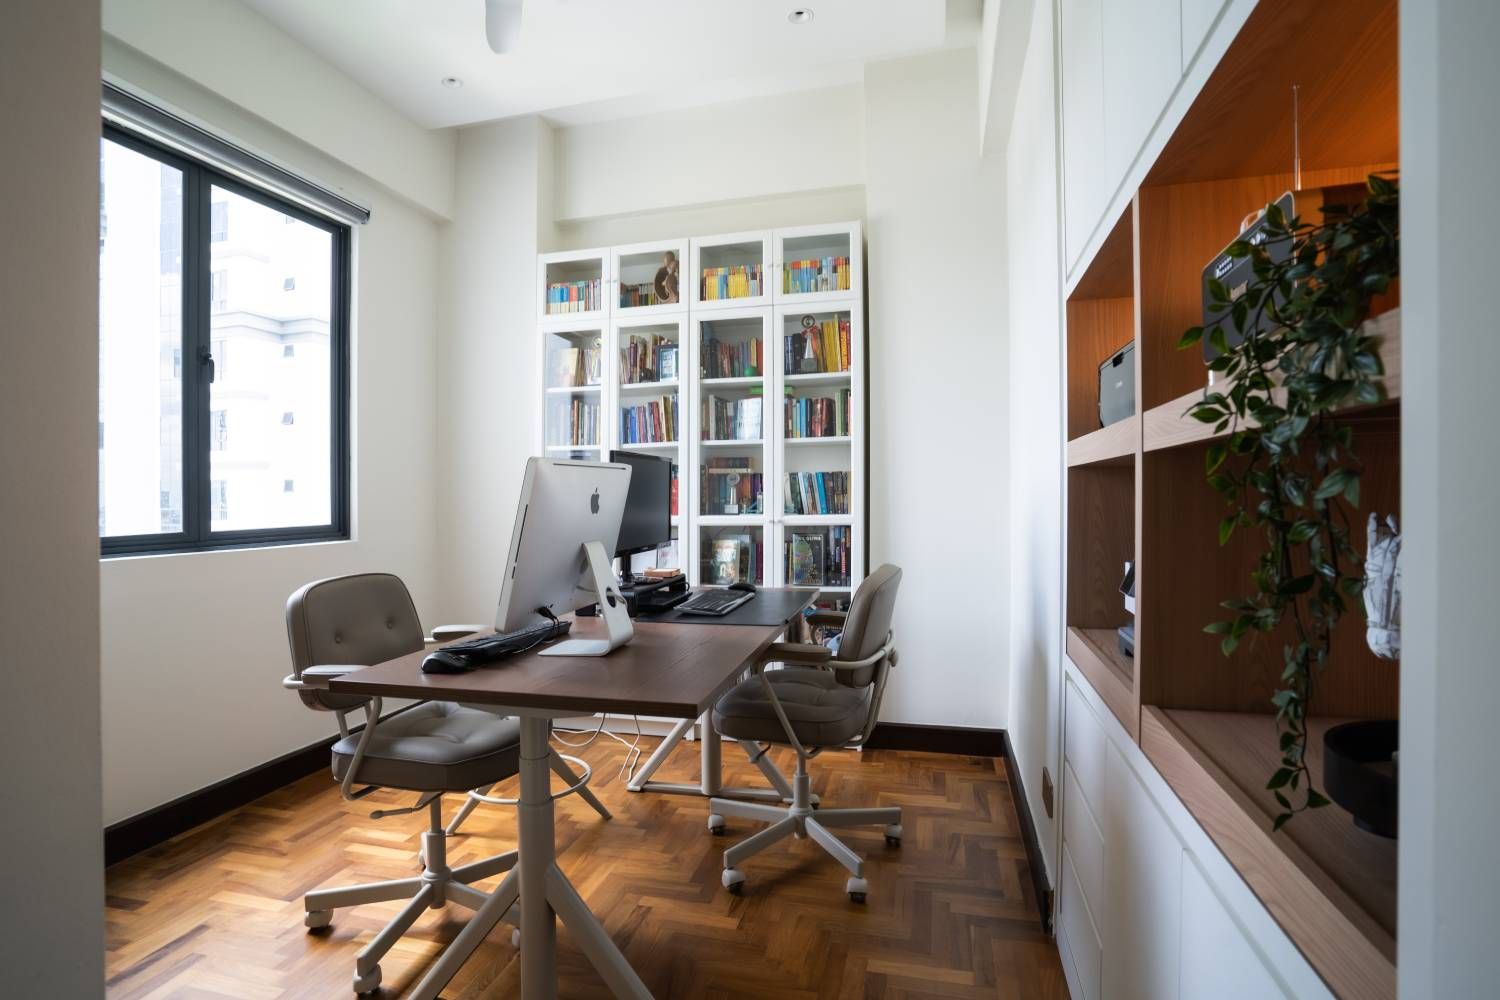 Contemporary Home Office Interior Design with Wooden Study Table and Adjustable Chairs